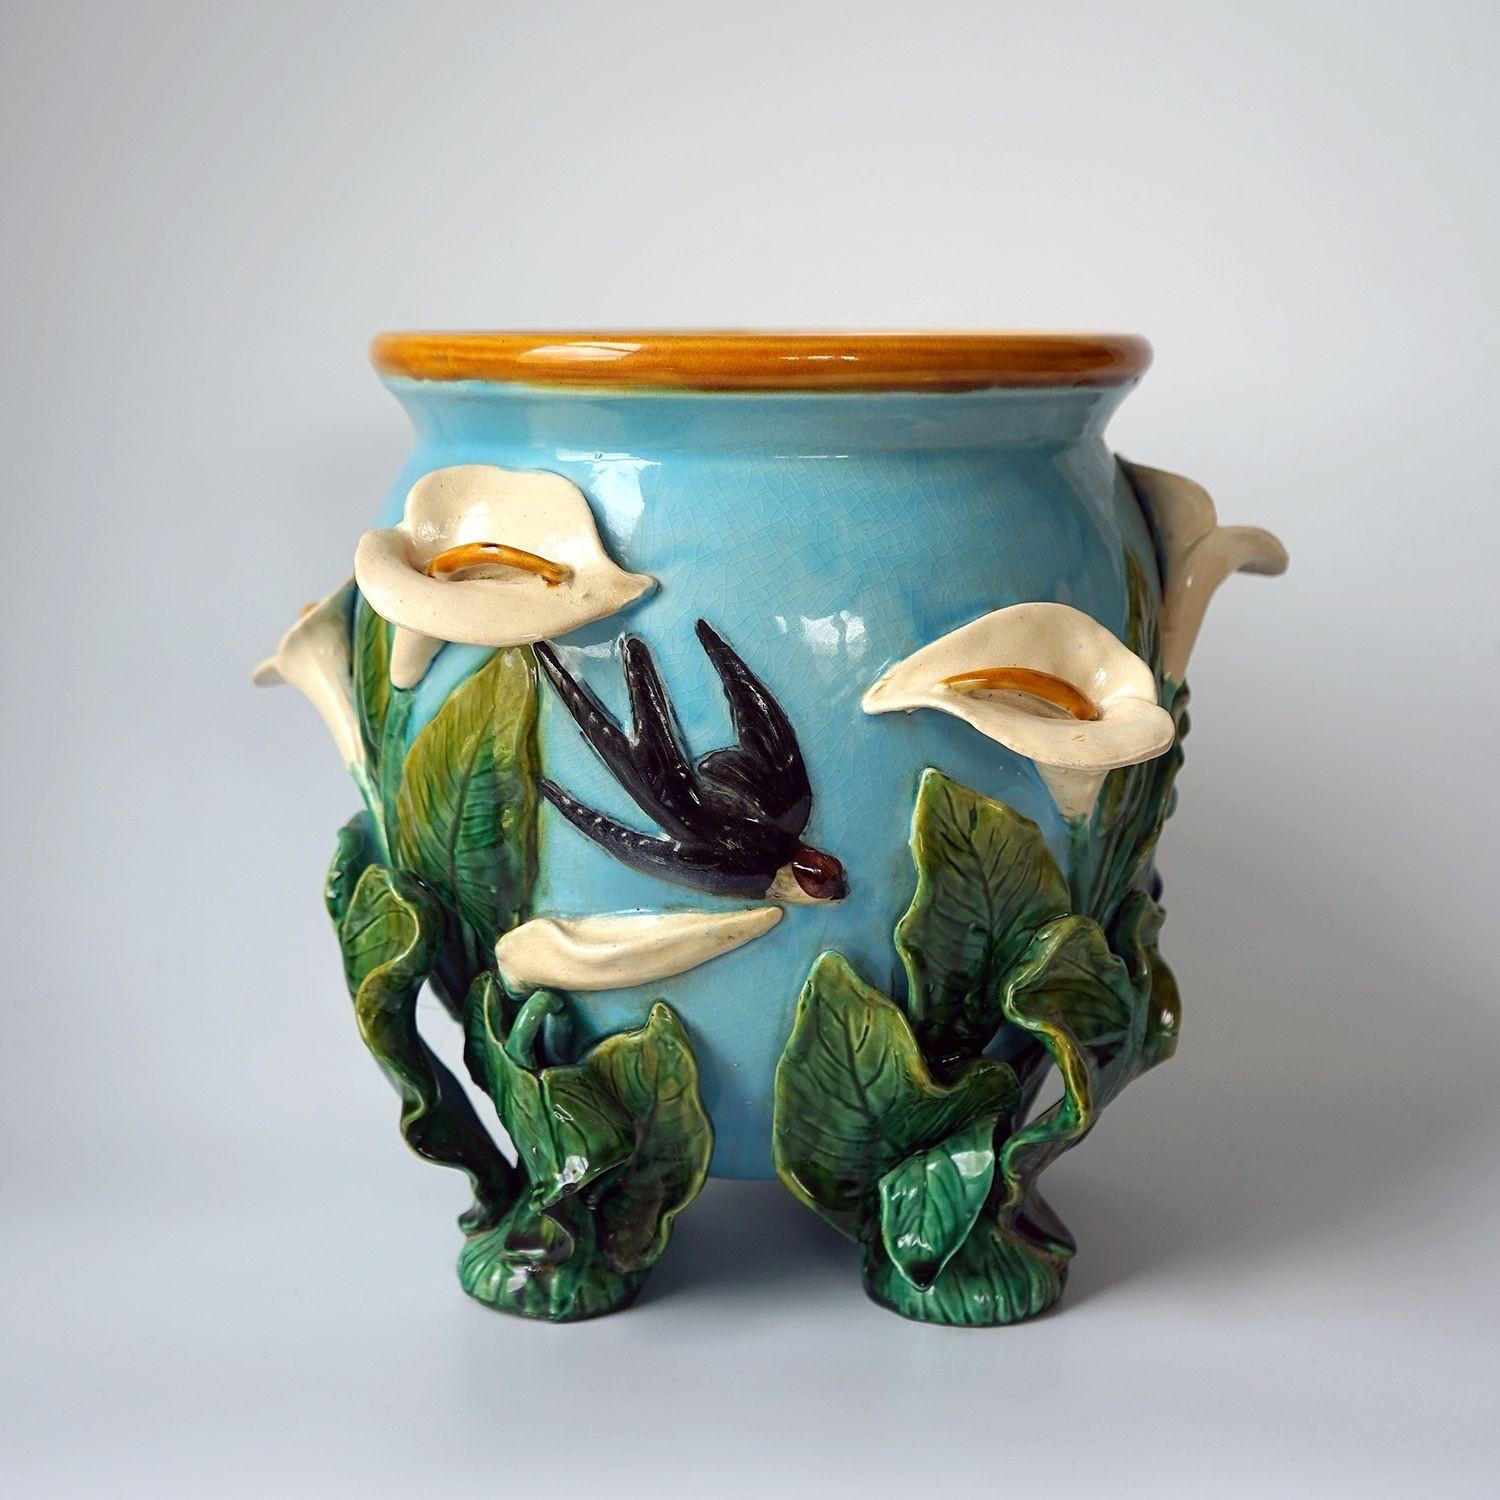 British Antique Majolica 'Swallow and Lily' Jardiniere by George Jones, 19th Century